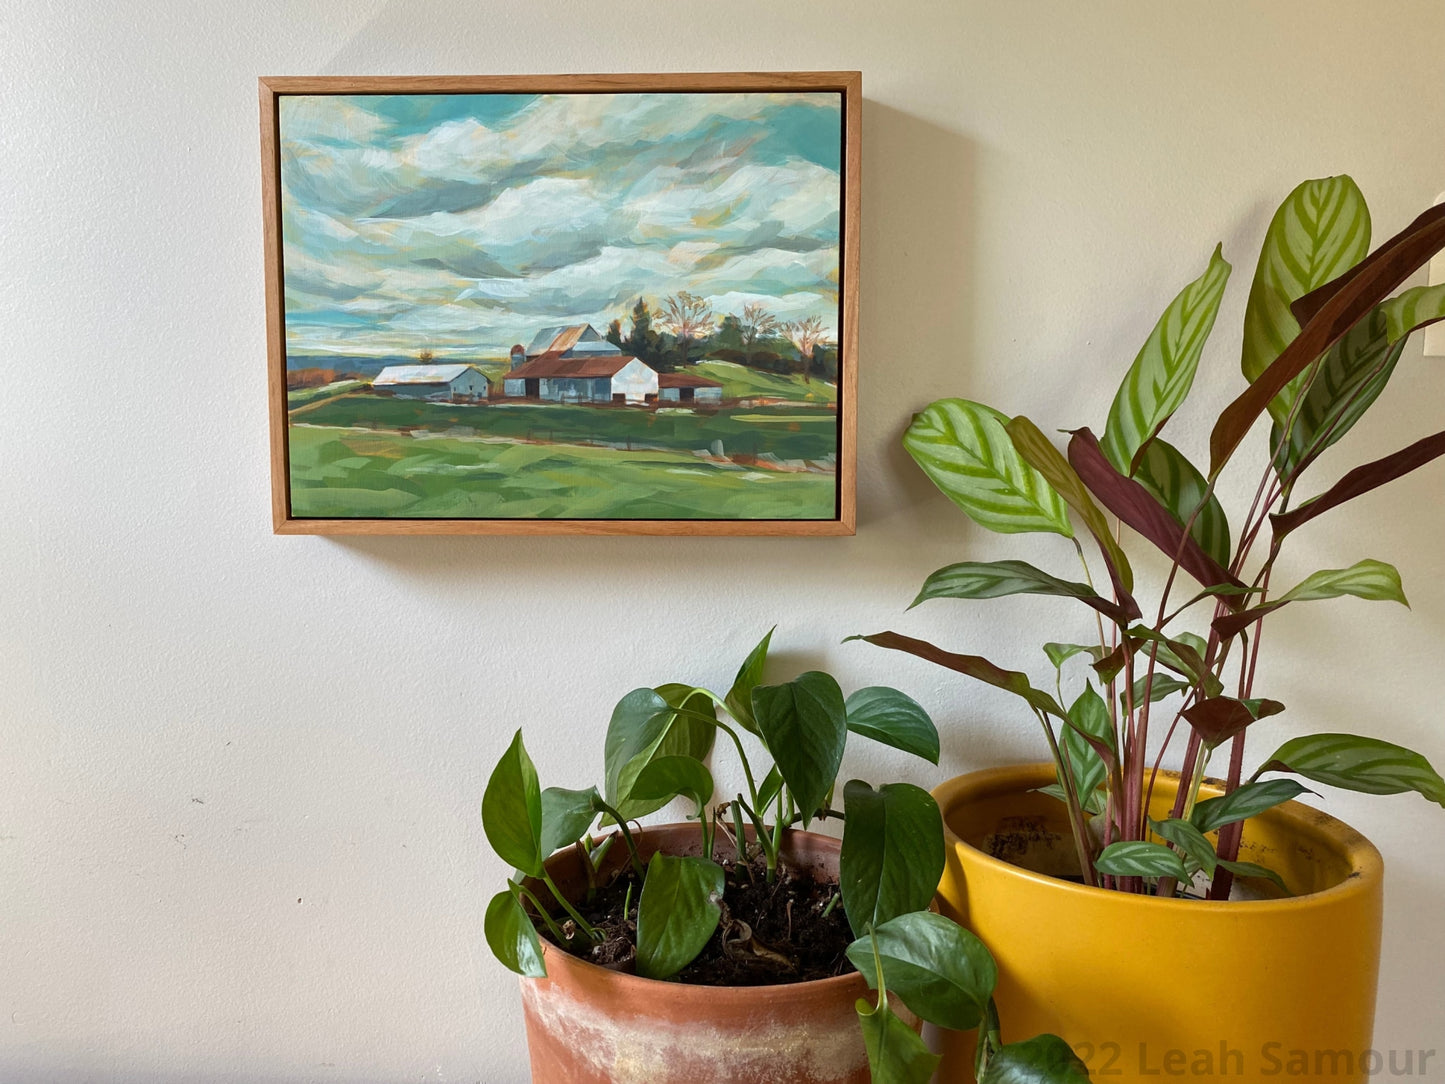 9x12 horizontal original framed art for sale featuring a Barn On The Way To Beach Acrylic Painting Wood Panel